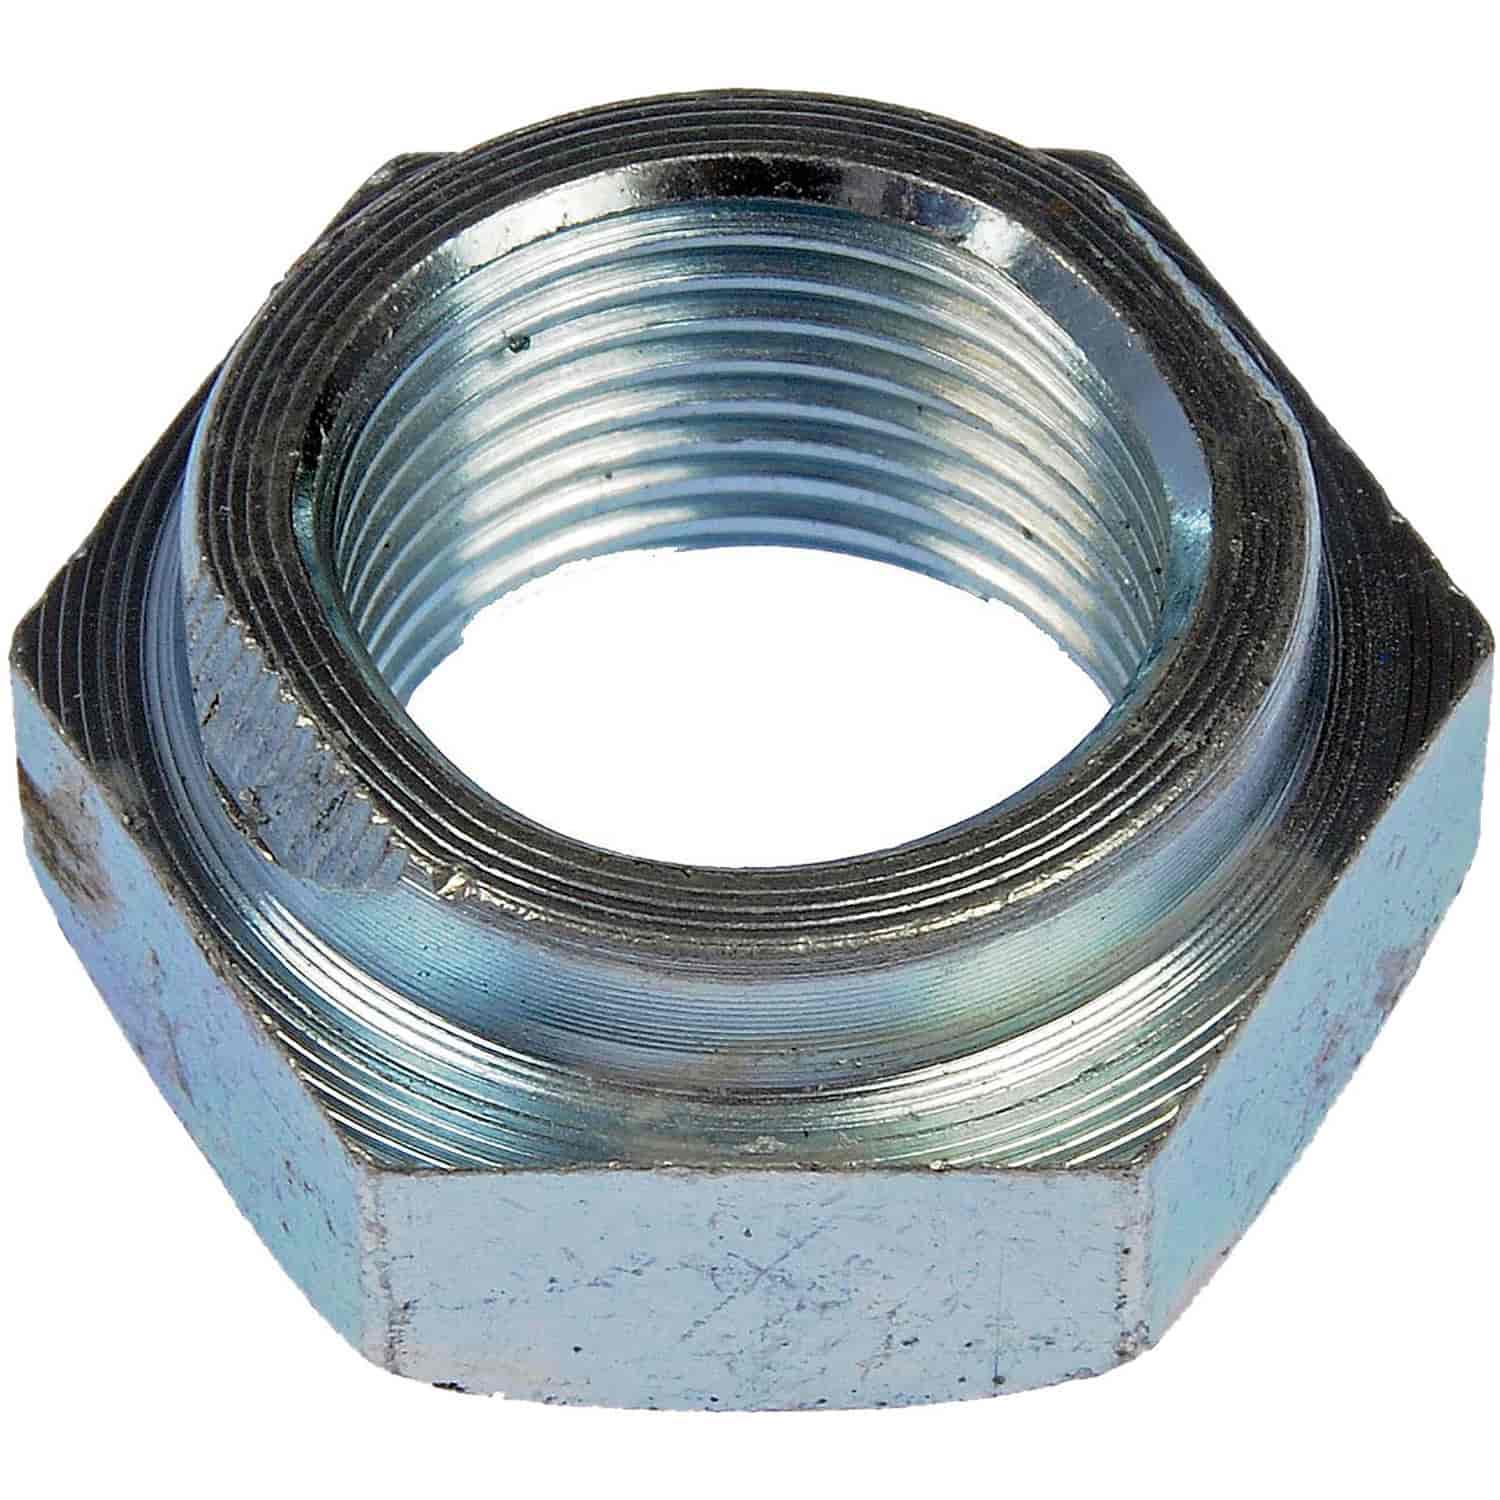 Spindle Nut 3/4-14 NPT Contents Nuts Washer Retainer